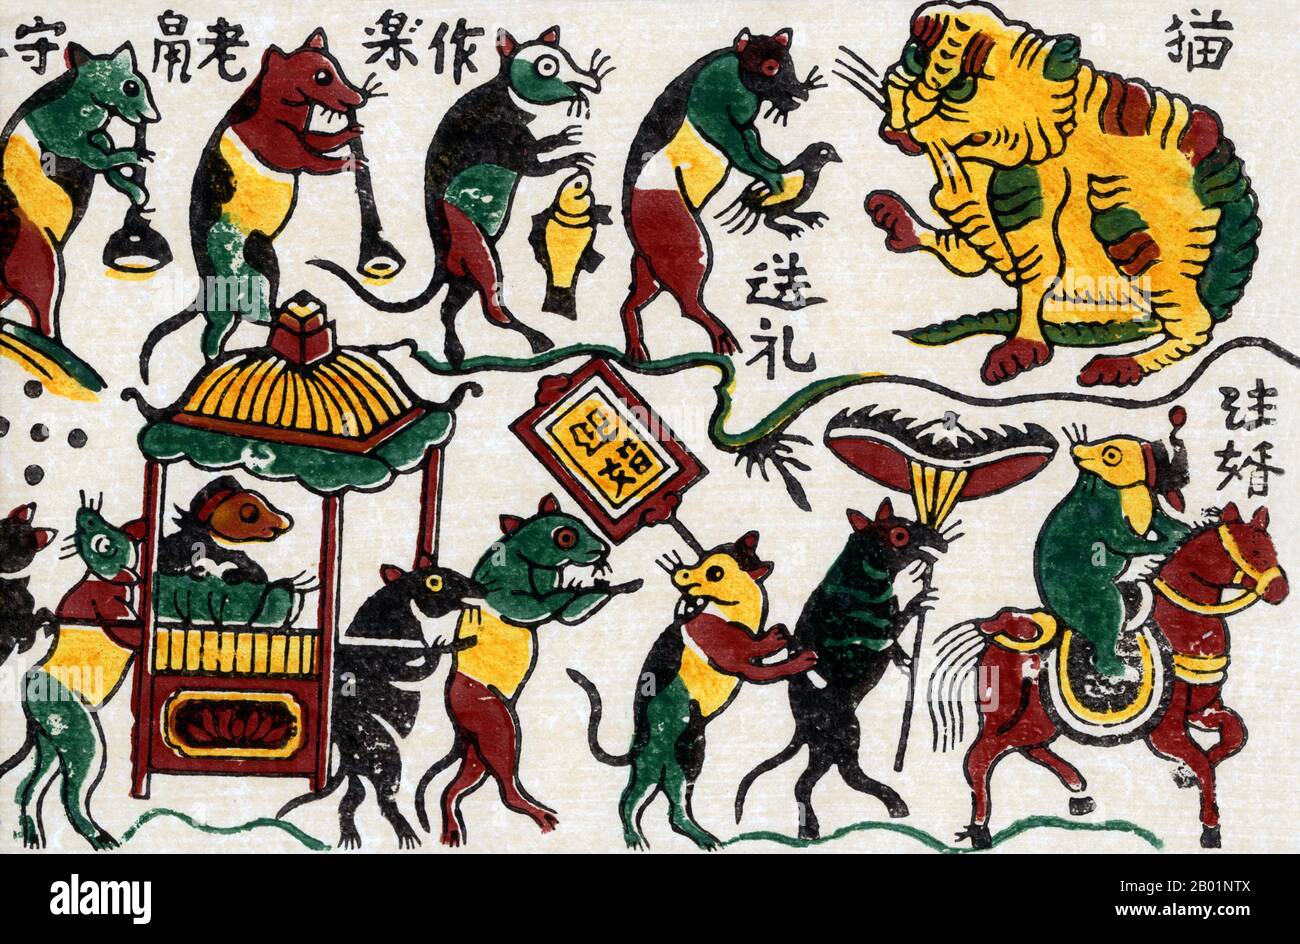 Vietnam: 'Lao Thu Thu Tan: Old Rat Taking a Bride'. Traditional woodblock painting of mice paying tribute to the big cat (China), from Dong Ho village, Bac Ninh Province, 20th century.  Dong Ho painting (Vietnamese: Tranh Đông Hồ or Tranh làng Hồ), full name Dong Ho folk woodcut painting (Tranh khắc gỗ dân gian Đông Hồ) is a genre of Vietnamese woodcut paintings originating from Dong Ho village (làng Đông Hồ) in Bac Ninh Province, Vietnam.  Using the traditional điệp paper and colours derived from nature, craftsmen print Dong Ho pictures of different themes. Stock Photo